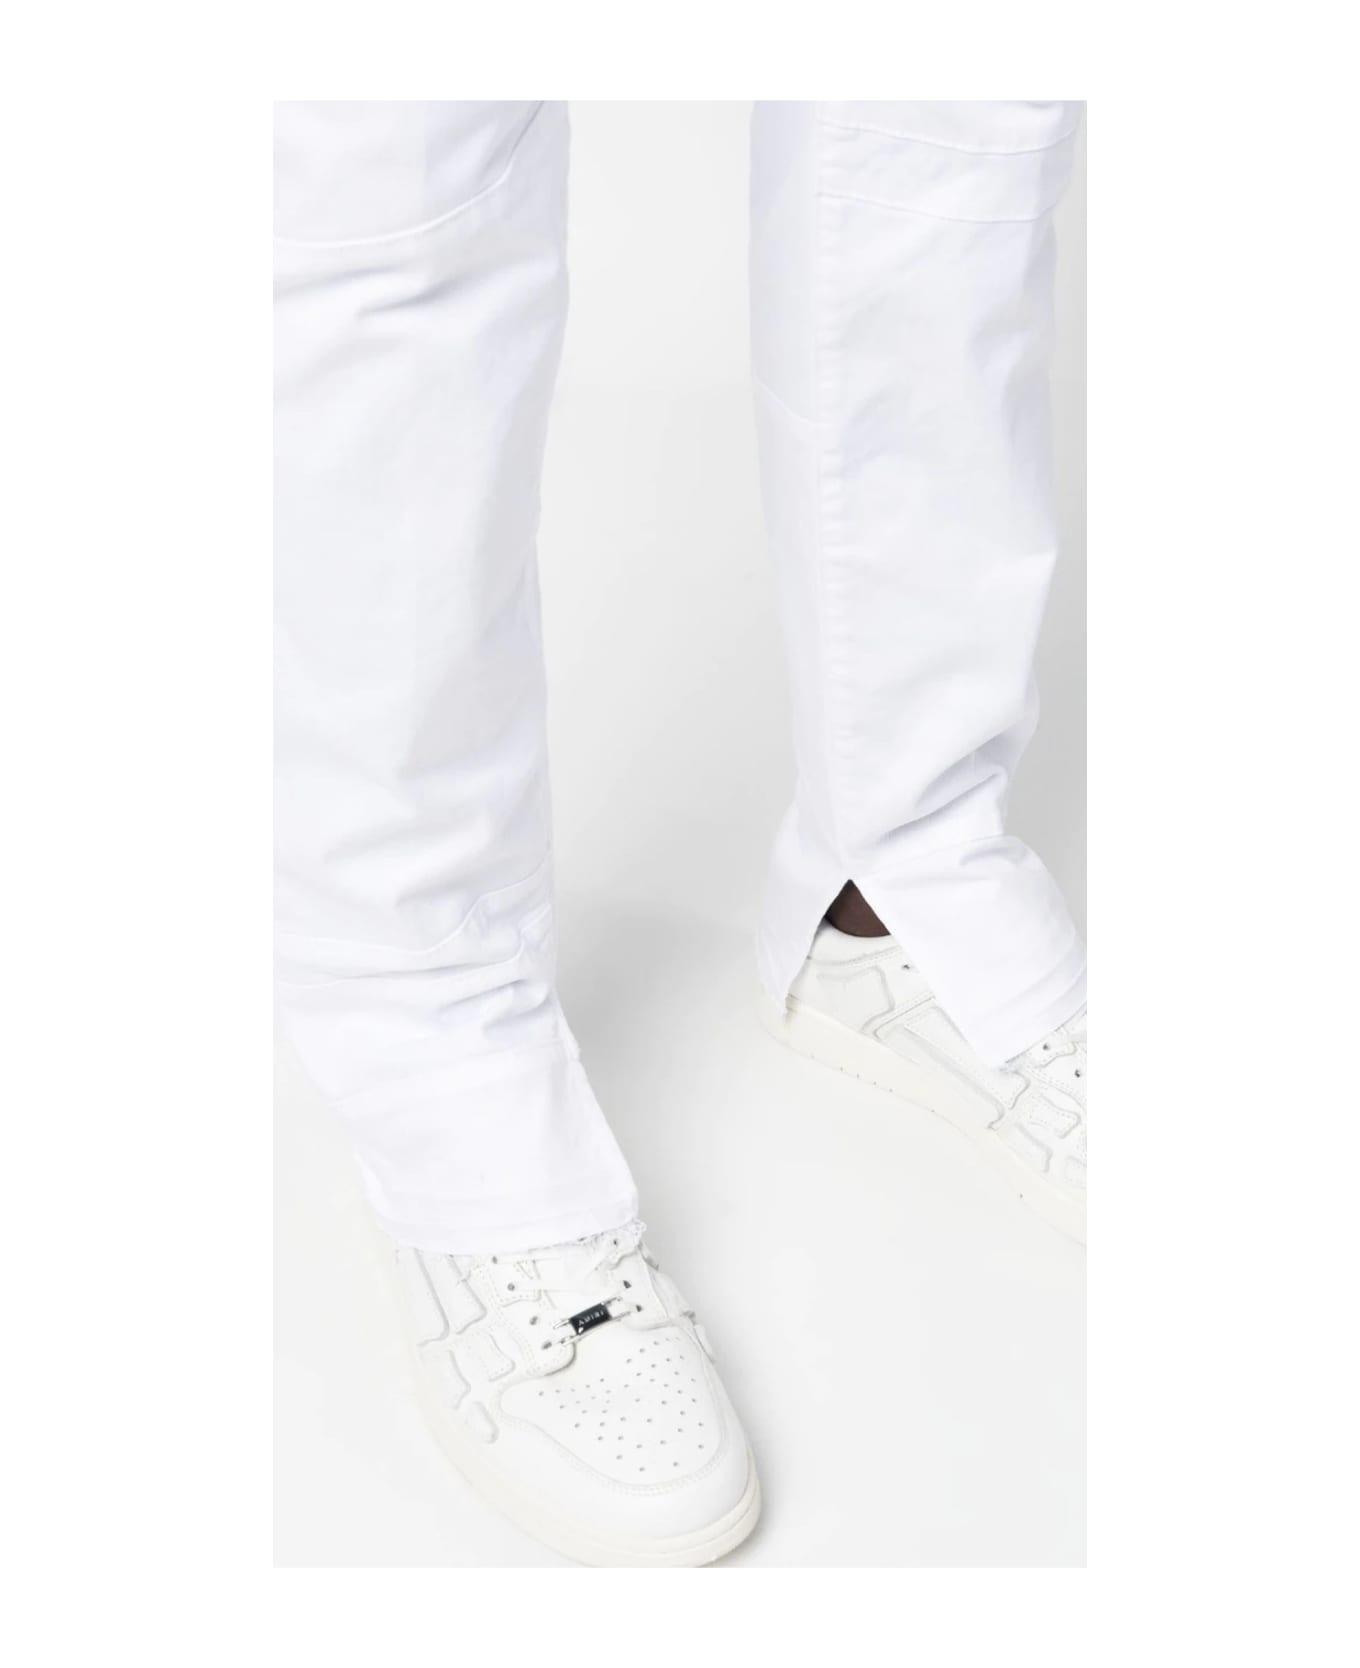 Dsquared2 Cool Guy Jeans - Bianco